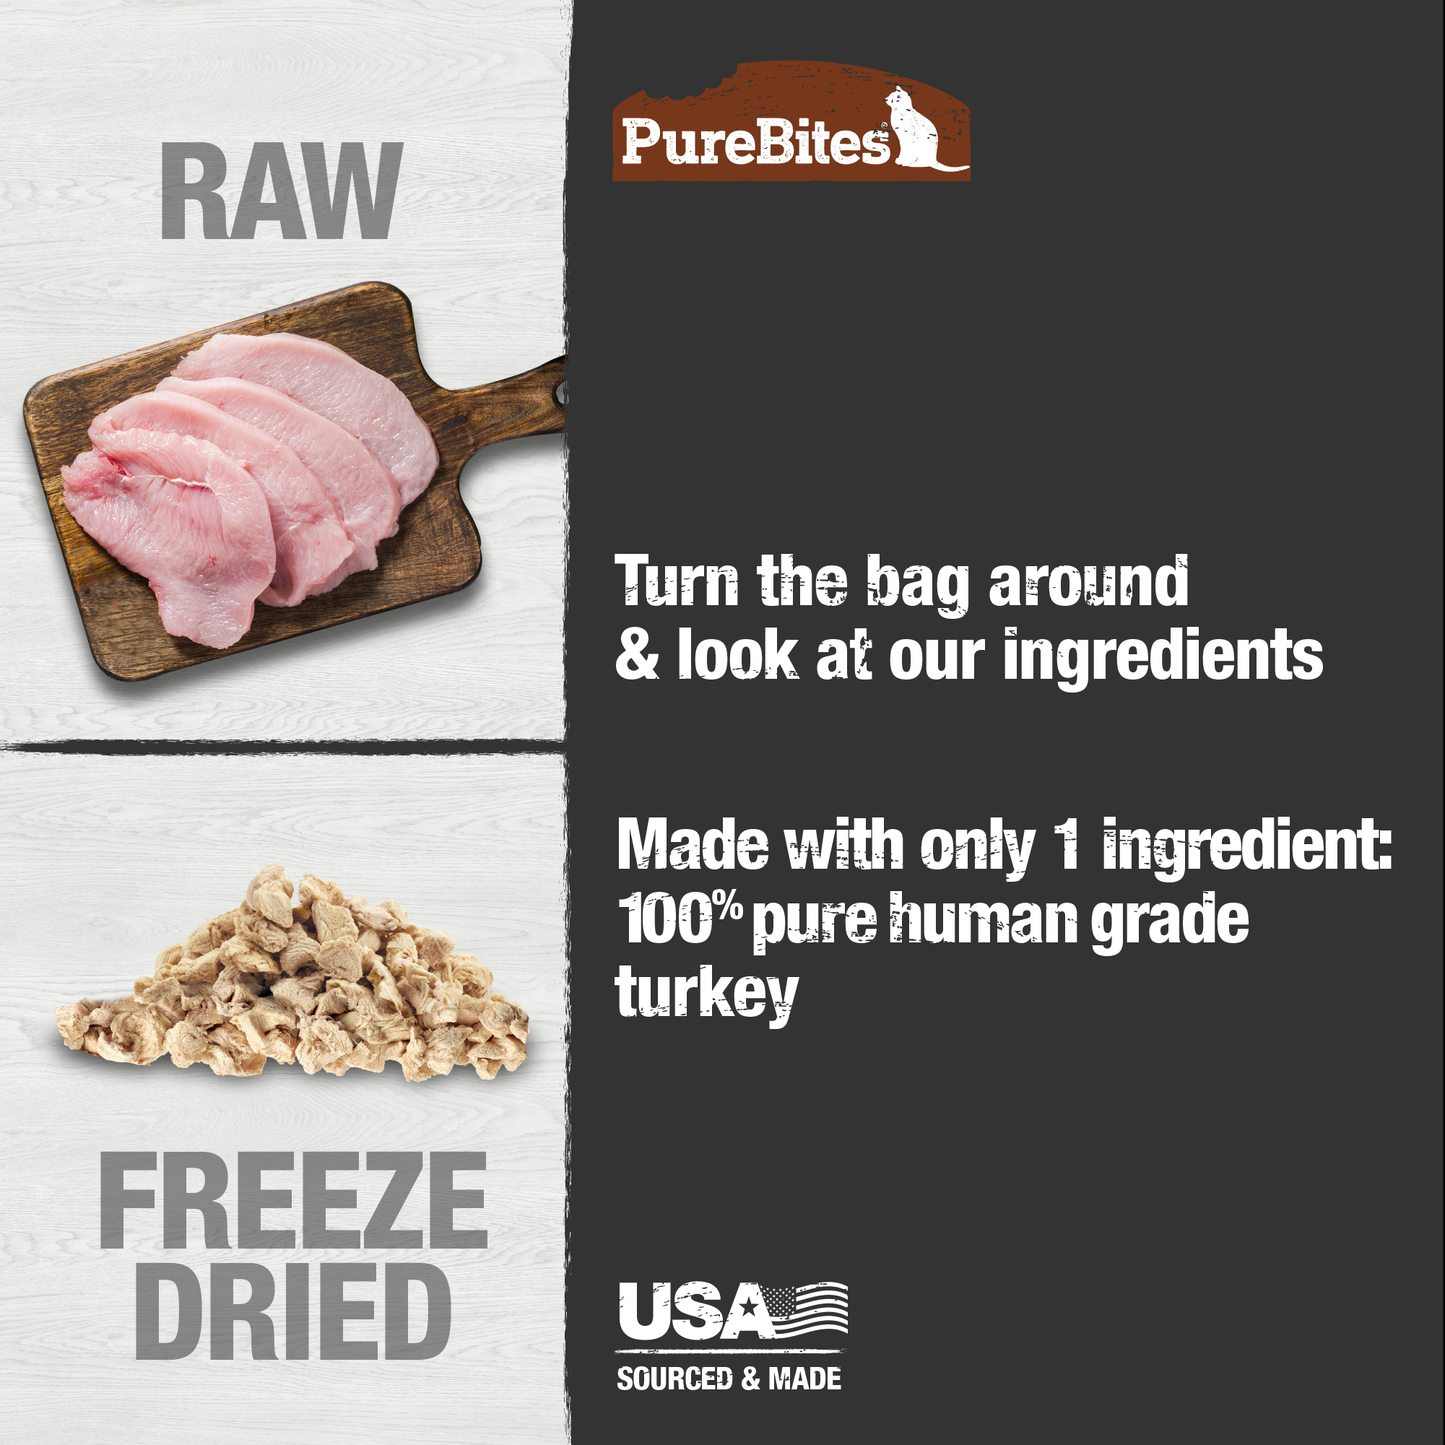 Made with only 1 Ingredient you can read, pronounce, and trust: USA sourced human grade turkey.